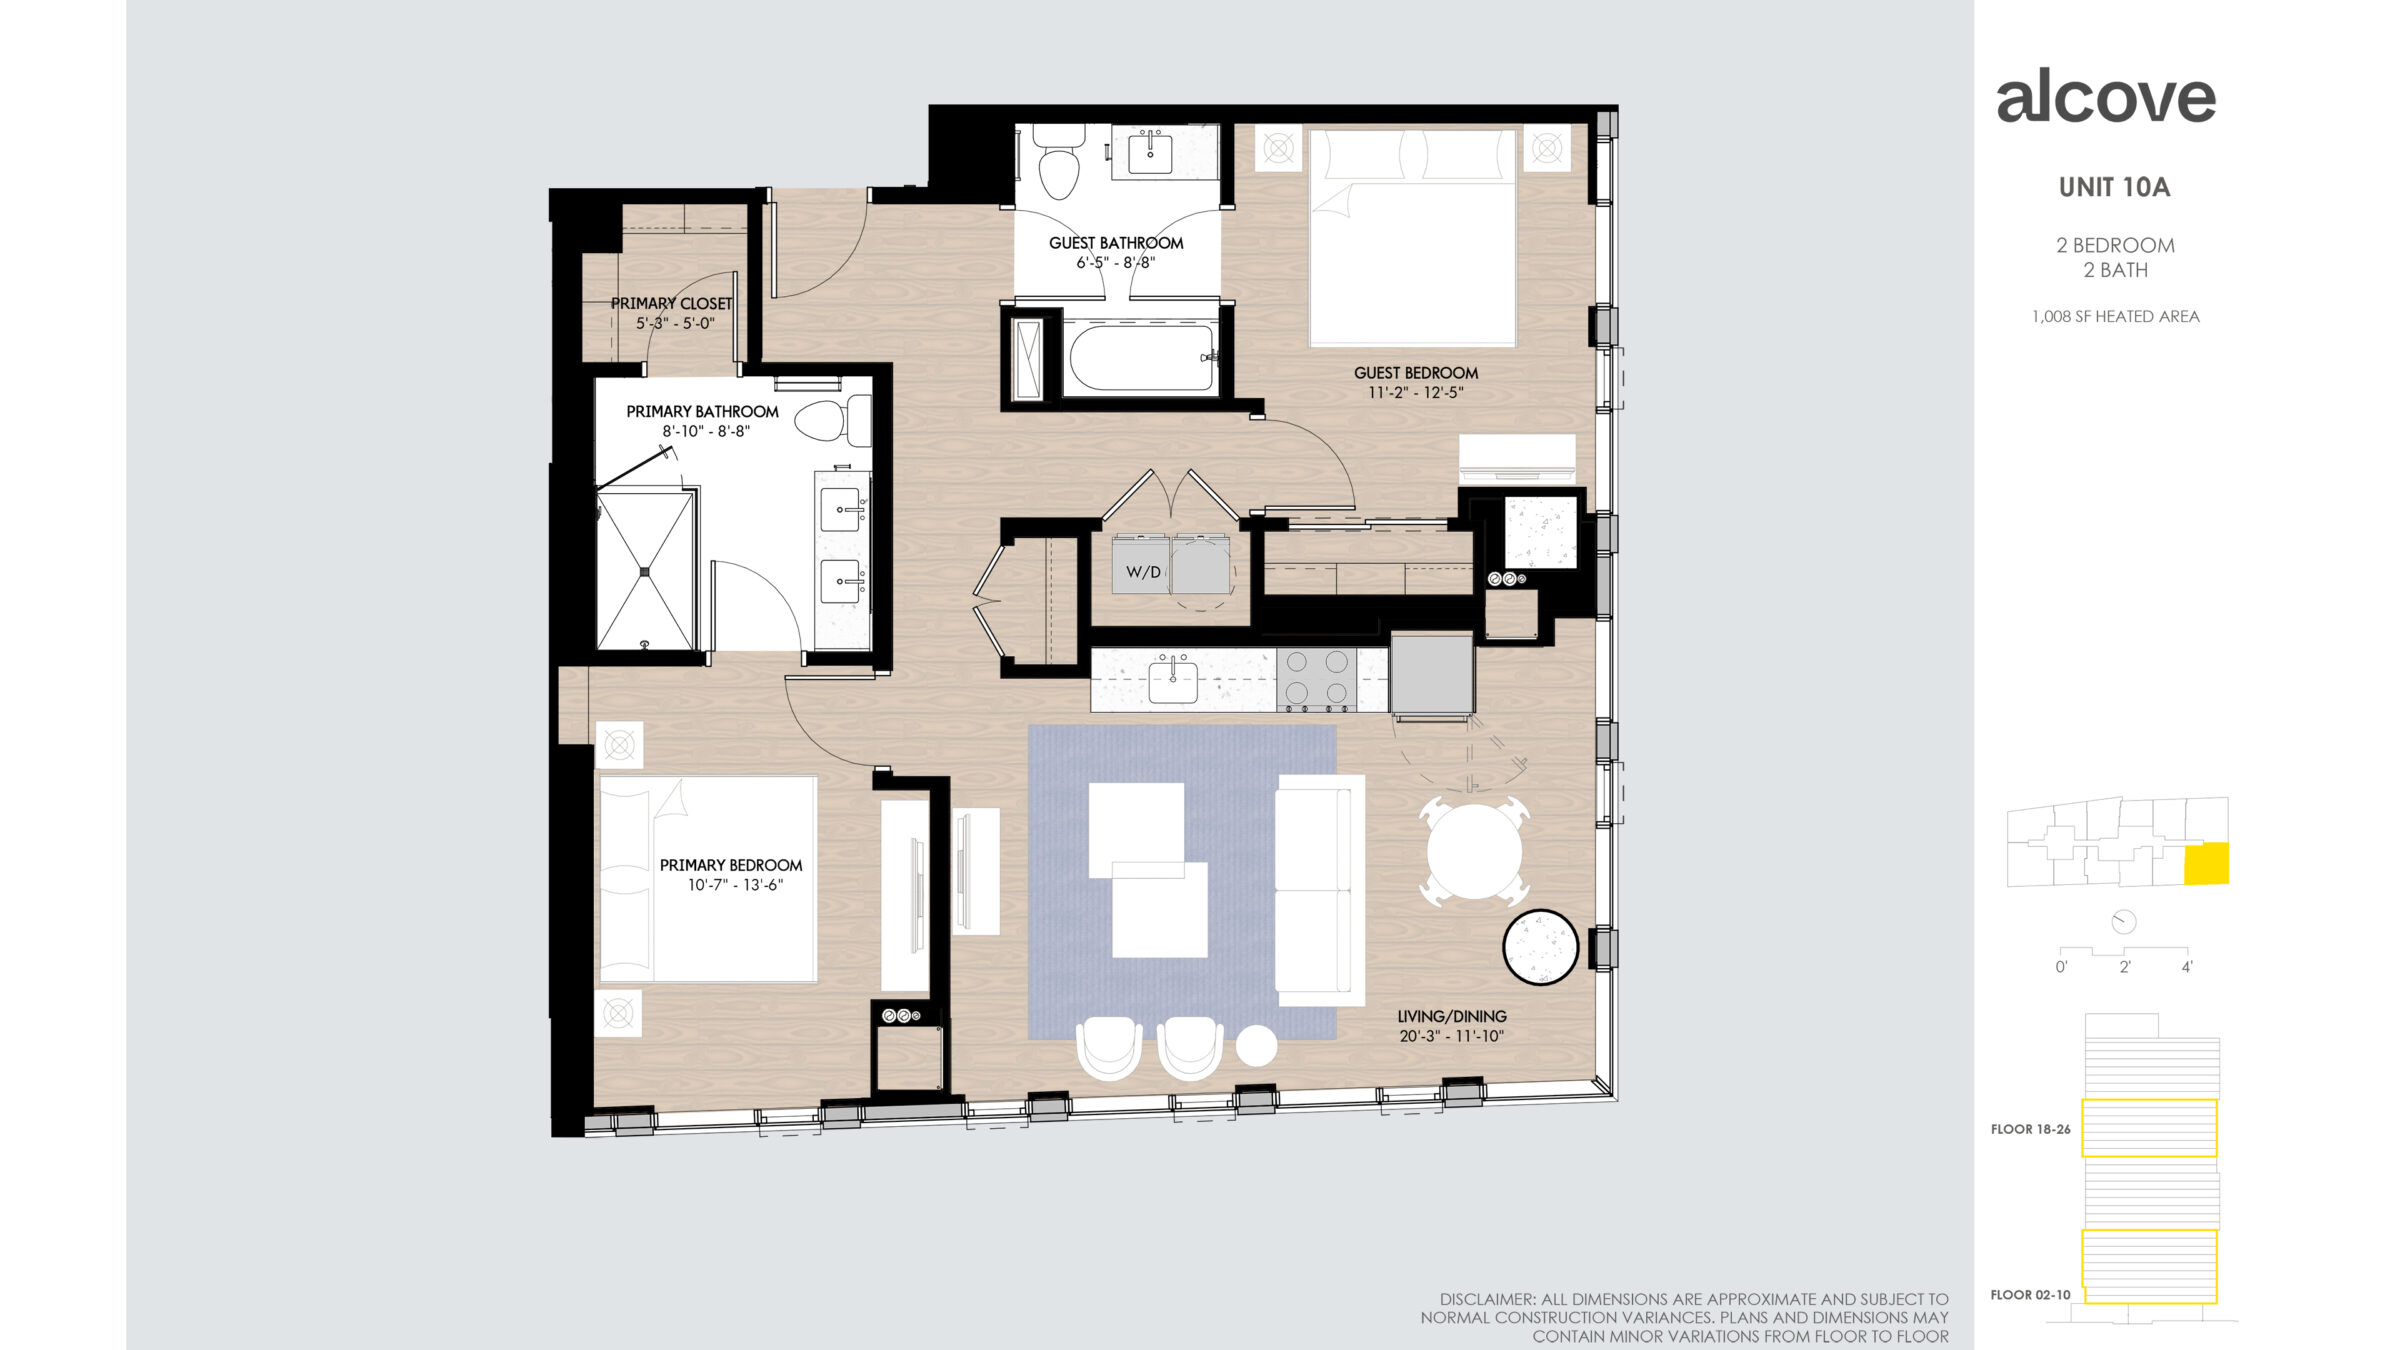 UNIT 10A 2 BEDROOM 2 BATH 1008 SF HEATED AREA Floors 18-26 Floors 02-10 Disclaimer: all dimensions are approximate and subject to normal construction variances. Plans and dimensions may contain minor variations from floor to floor.